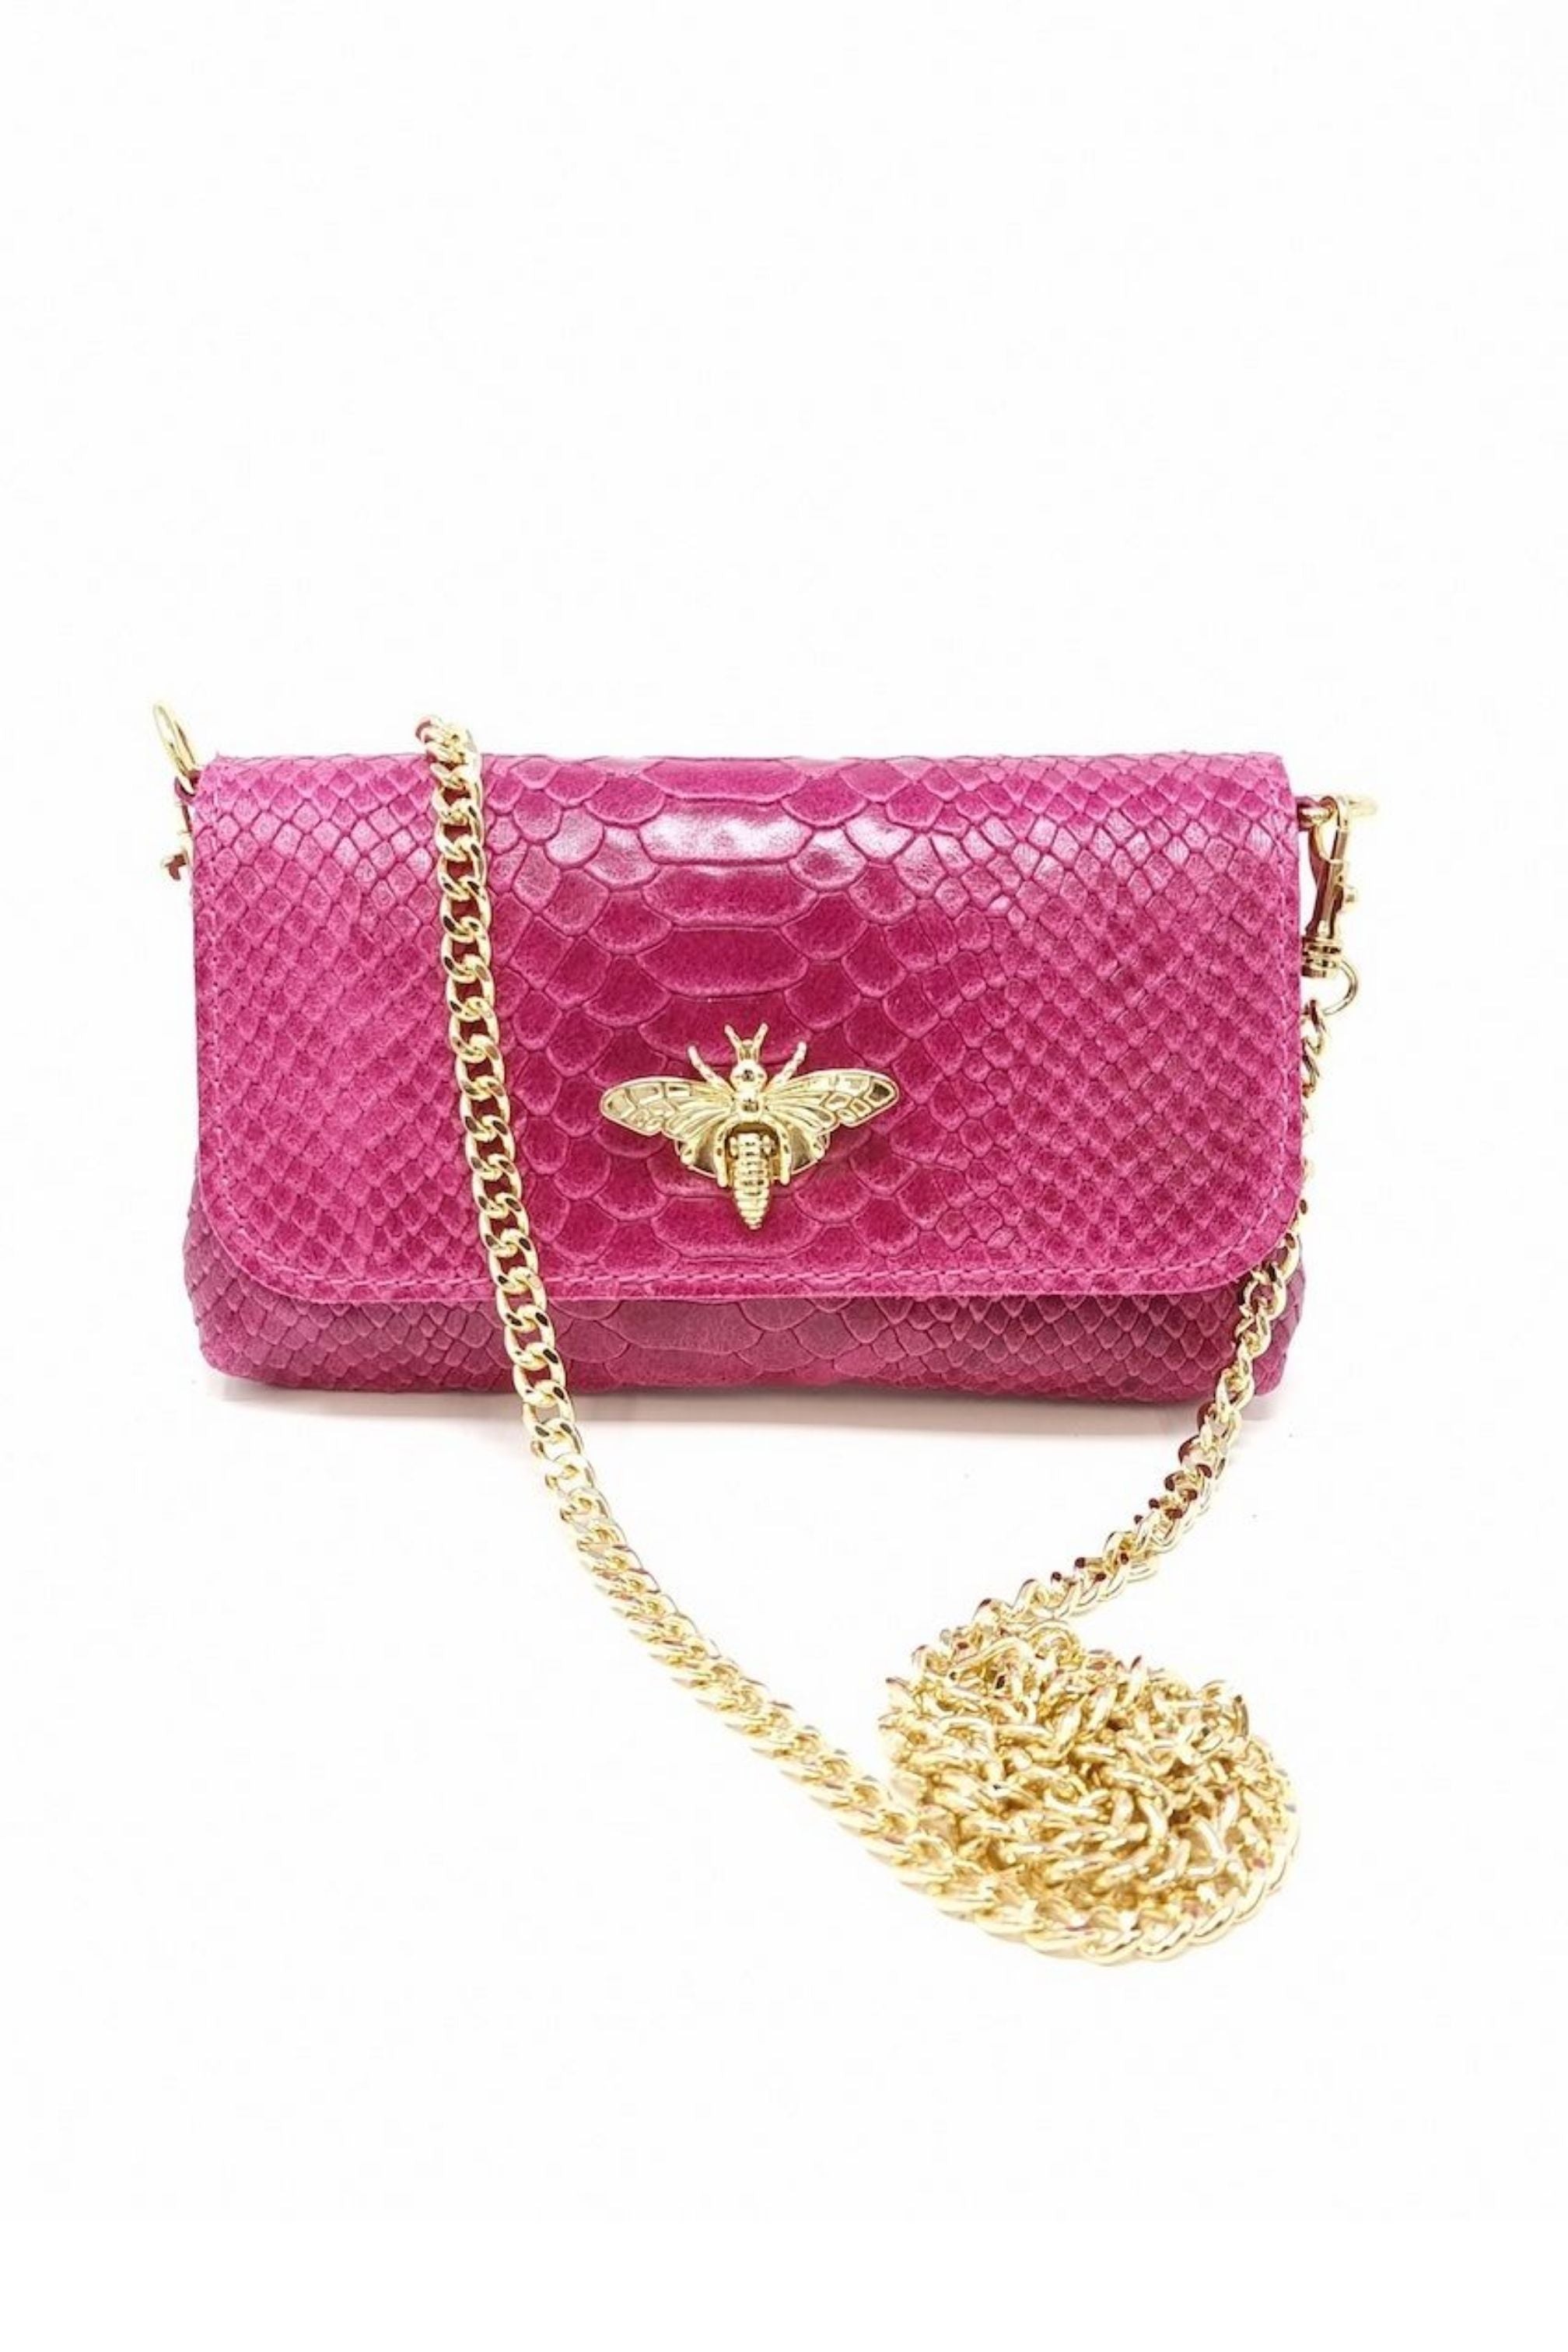 Bee Leather Bag with Gold Chain Black / Os